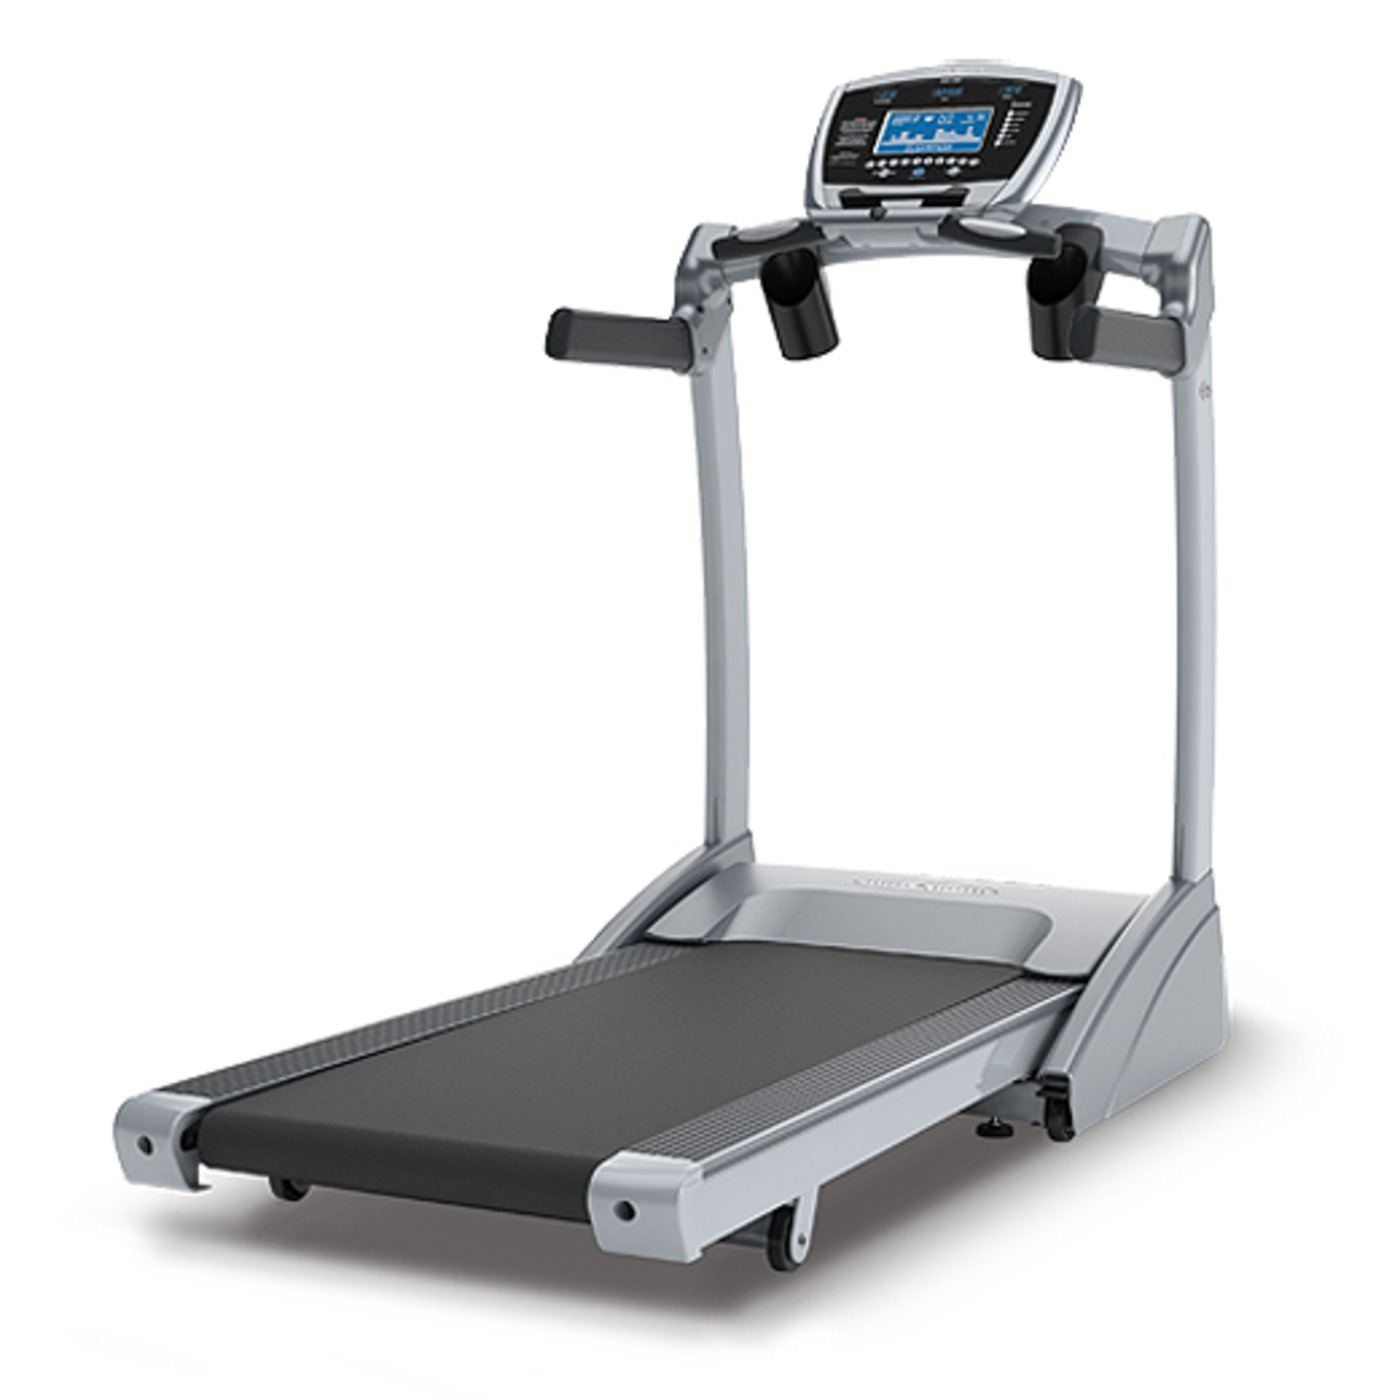 T9550 Treadmill (with New Deluxe